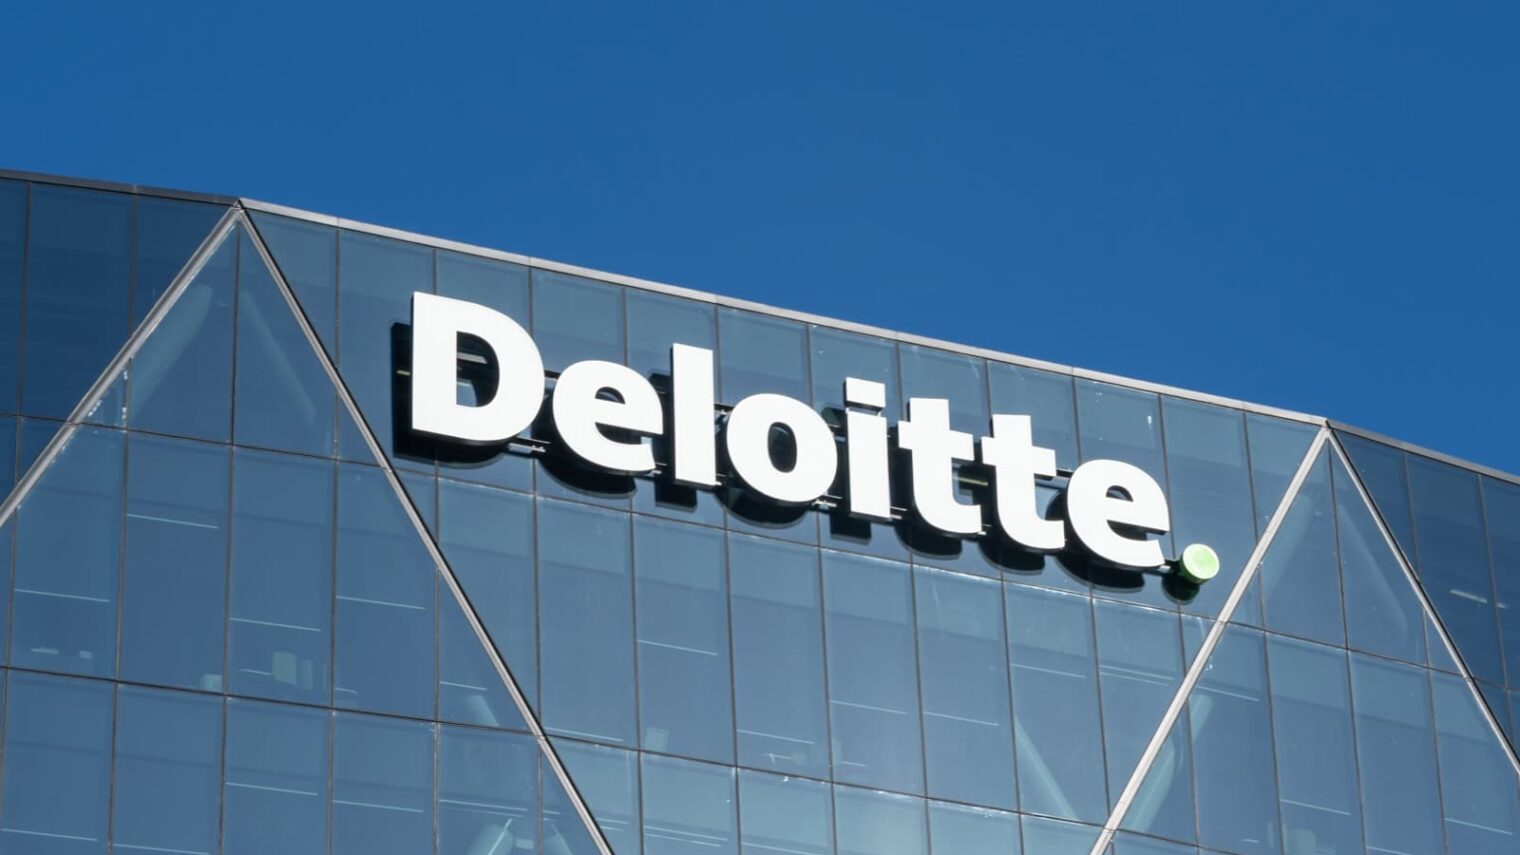 Deloitte is one of the world’s leading accounting firms. Photo by JHVEPhoto via Shutterstock.com